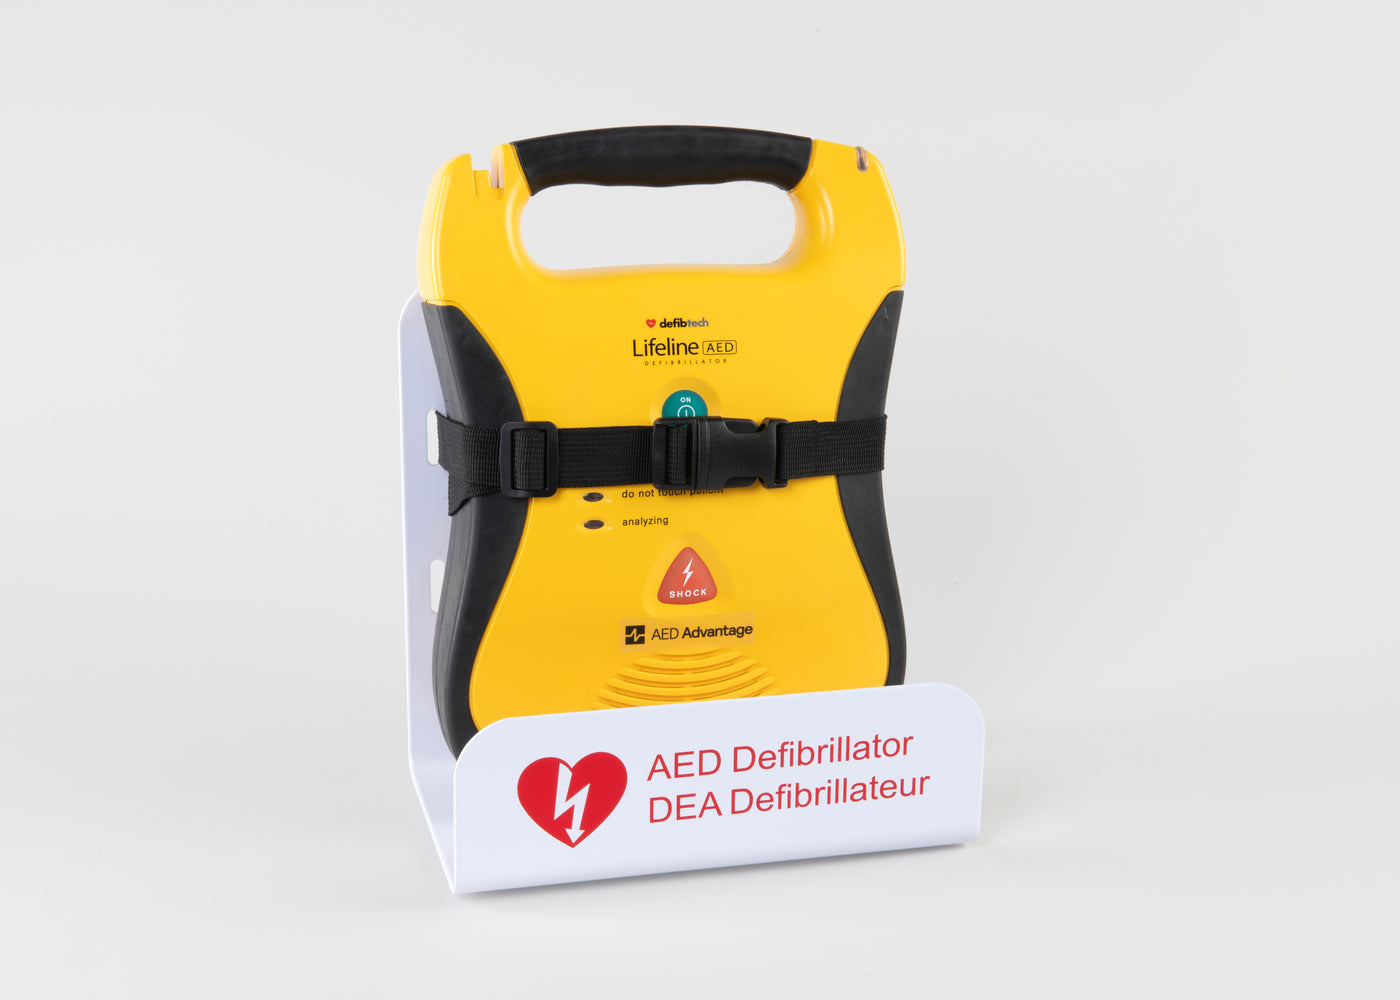 A black and yellow Defibtech Lifeline AED strapped into a white metal wall mount bracket